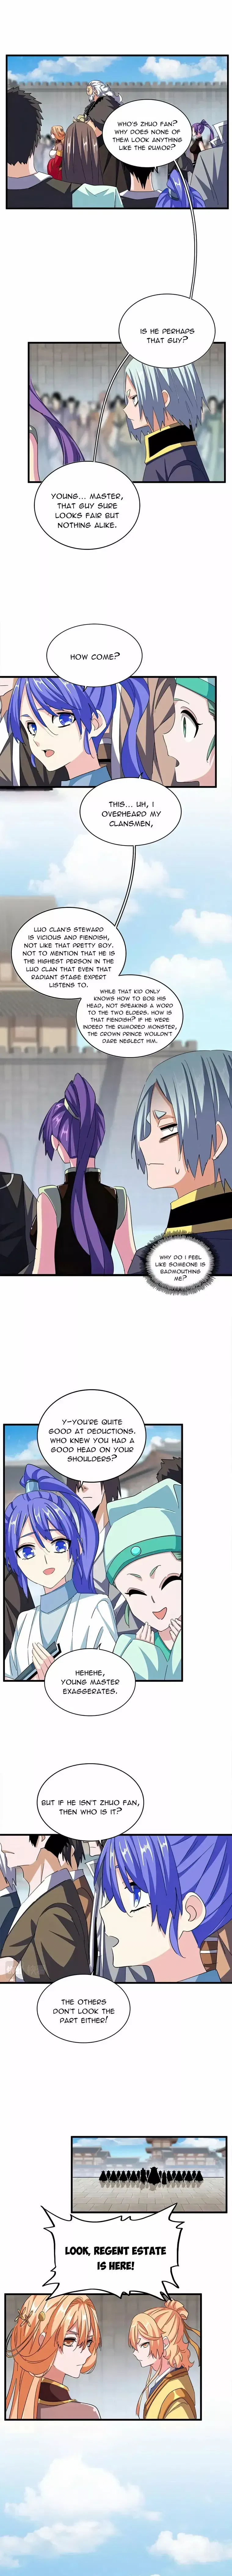 Magic Emperor Chapter 381 page 2